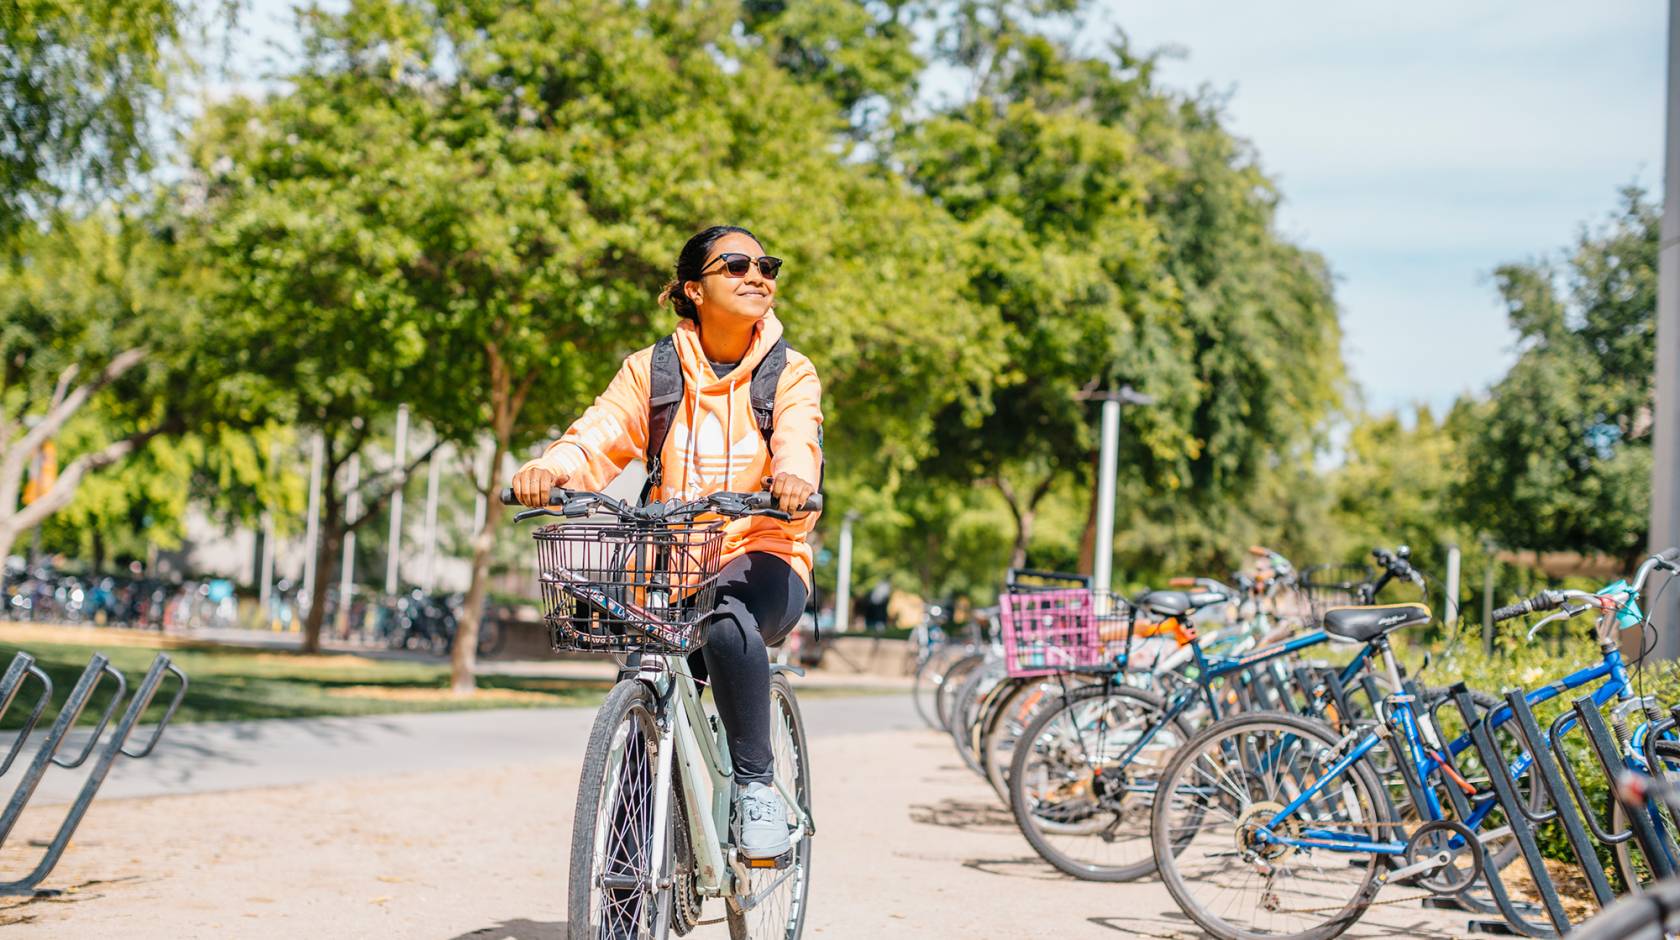 A student smiling in sunglasses riding a bike